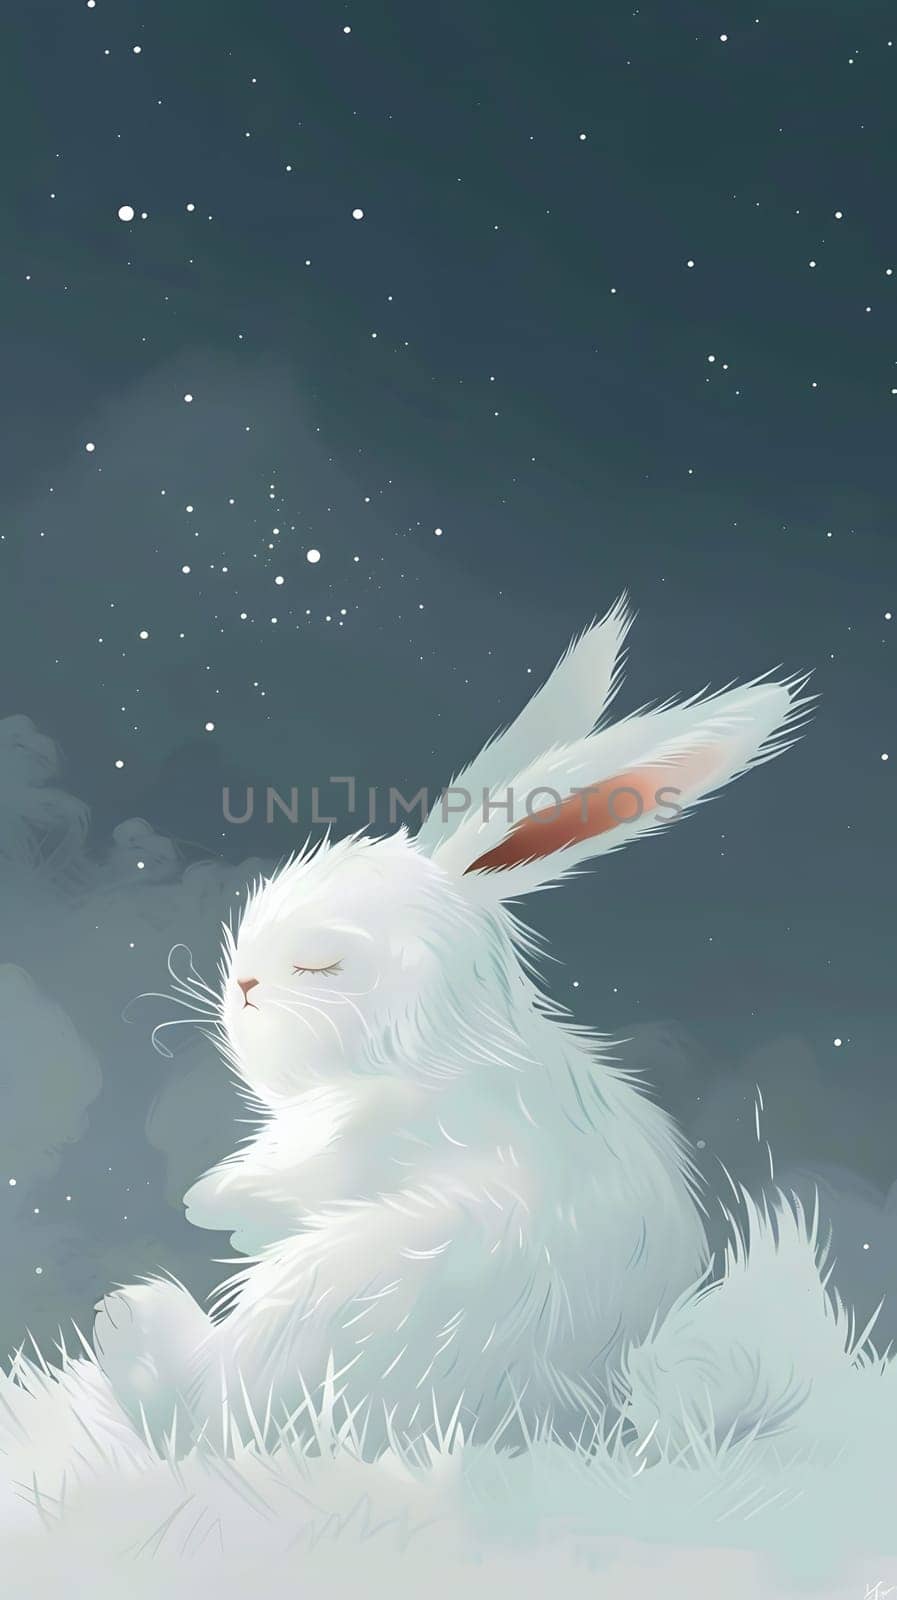 A white rabbit peacefully sits in the grass with closed eyes, undisturbed by the wind or any event around. The rabbits fluffy fur blends seamlessly with the greenery